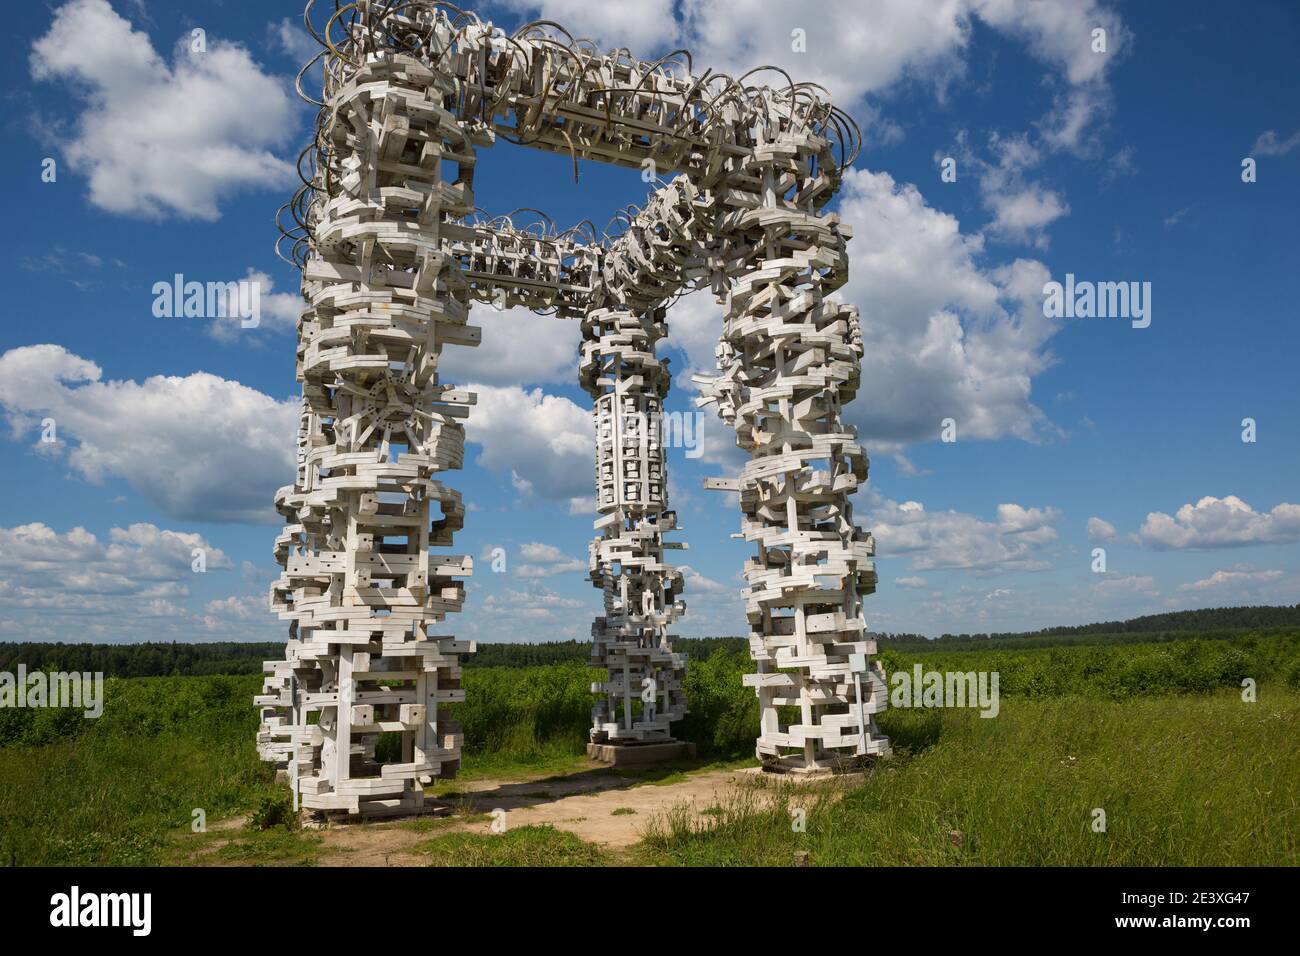 Russia, Kaluga, june 24, 2020. Festival of art objects in Nikola Lenivets Archstoyanie. White Gate. Creative construction made of natural materials, b Stock Photo